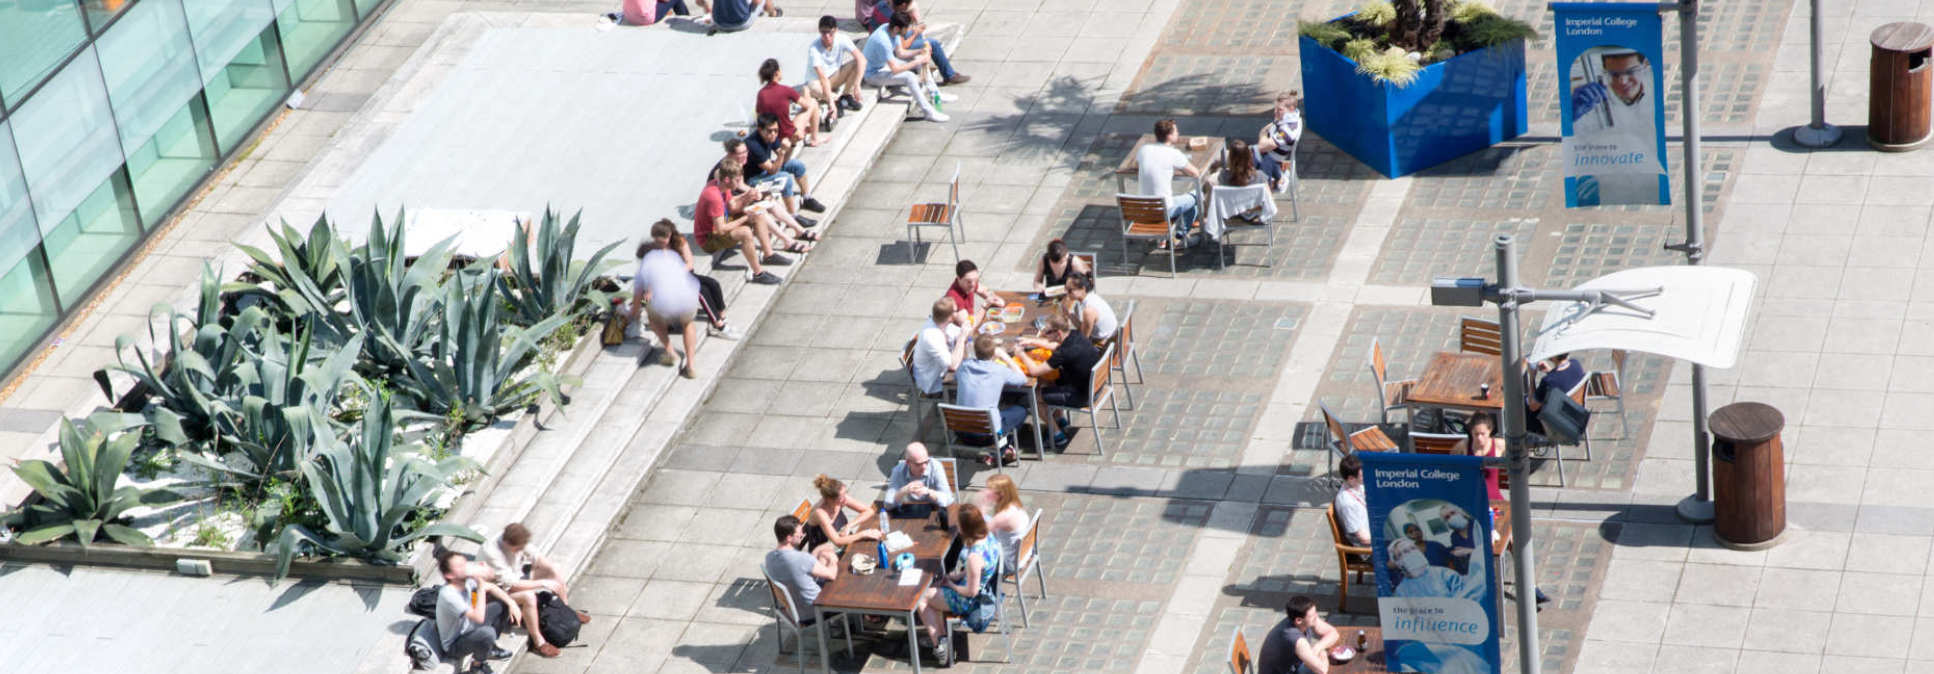 Image of people relaxing on Dalby Court at Imperial College London